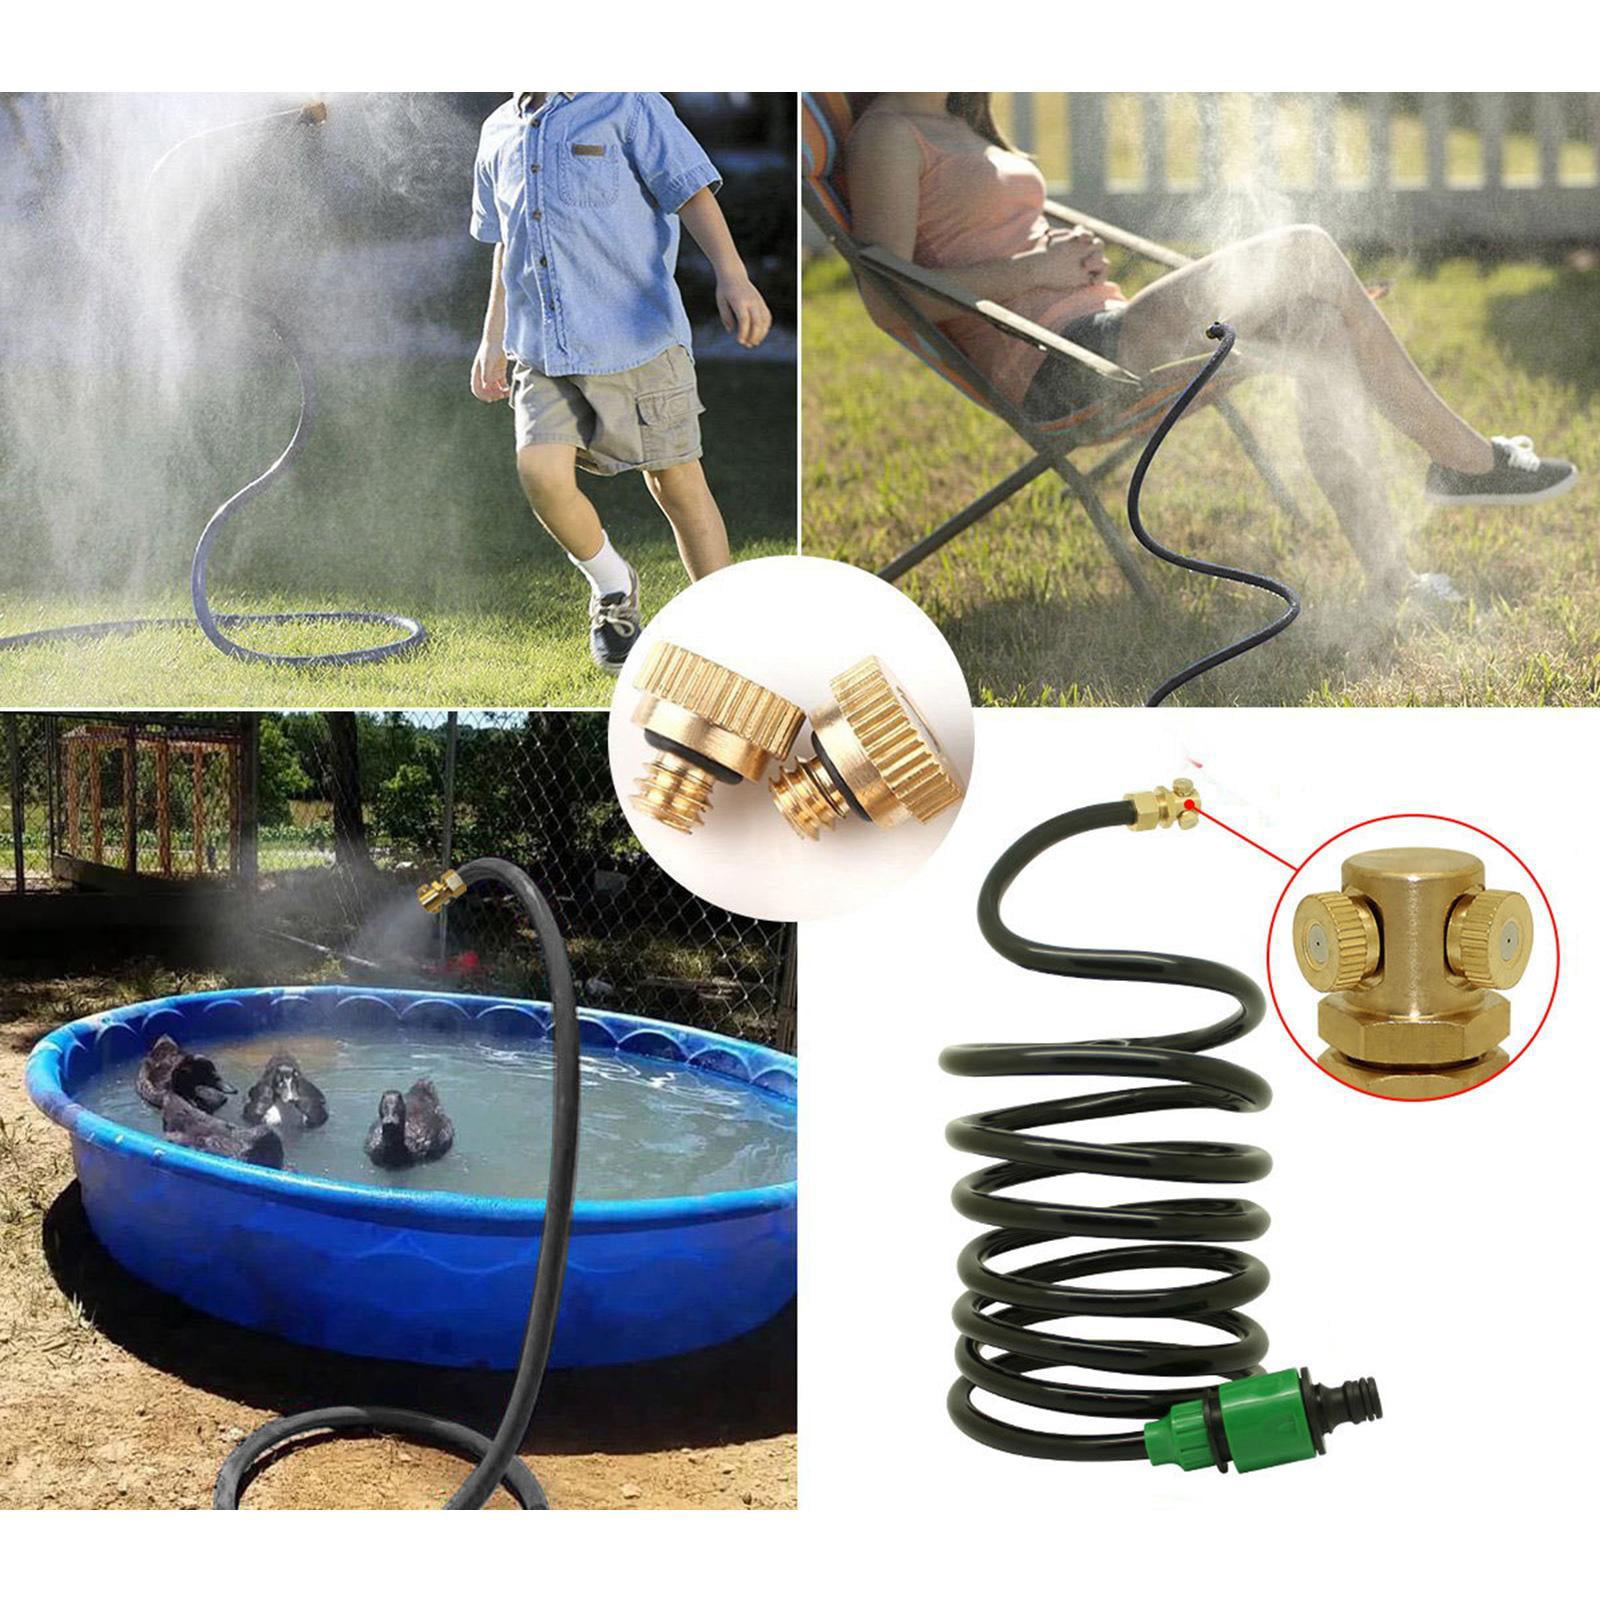 Details about   Micro Flow Drip Irrigation System 360 Degree Adjustable Garden Watering Hose Kit 